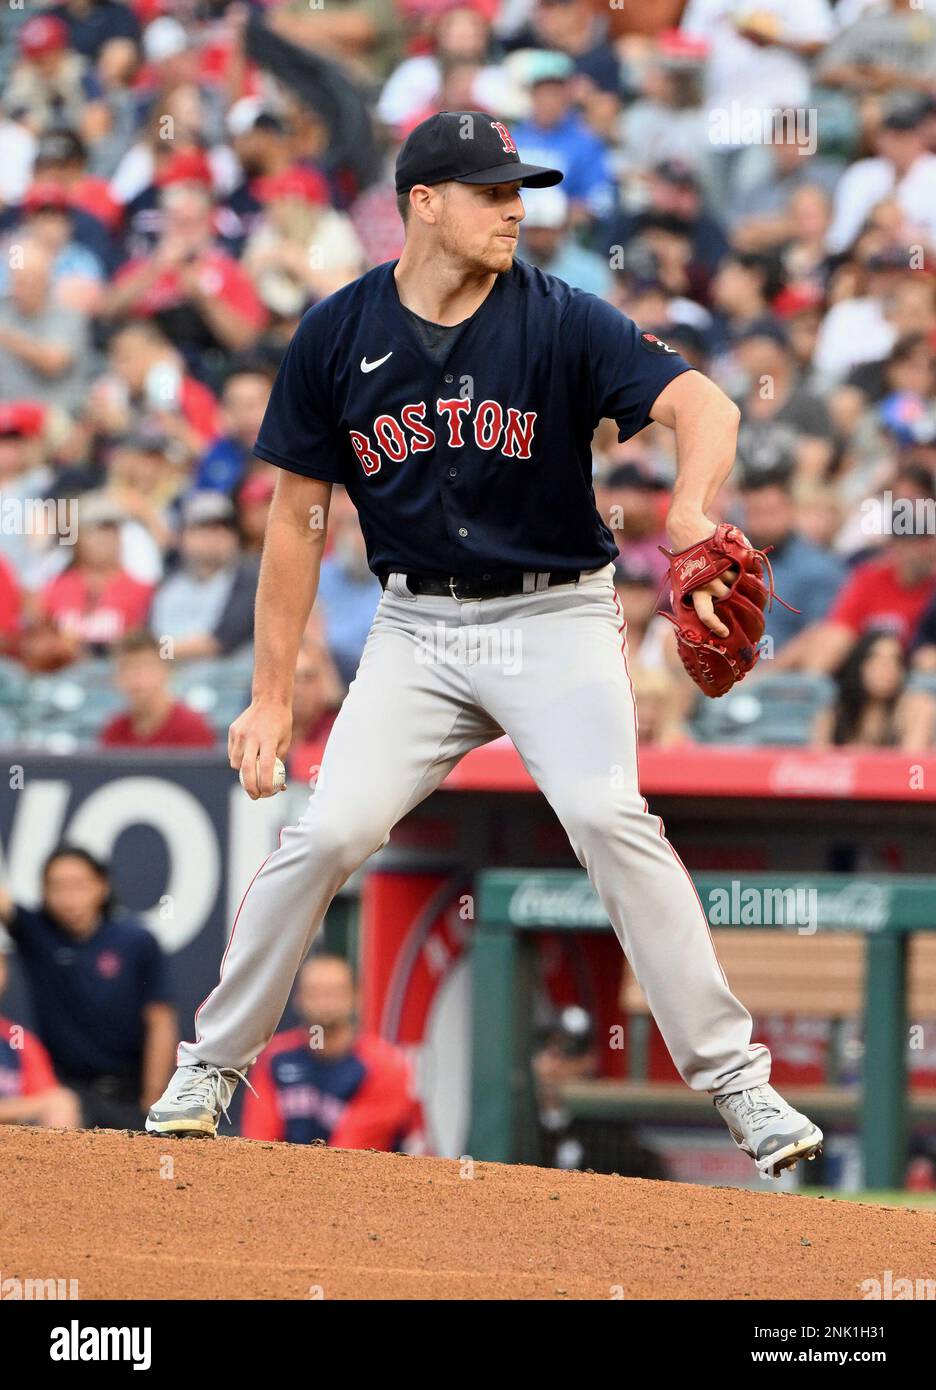 ANAHEIM, CA - JUNE 09: Boston Red Sox pitcher Nick Pivetta (37) pitching in  the first inning of an MLB baseball game against the Los Angeles Angels  played on June 9, 2022